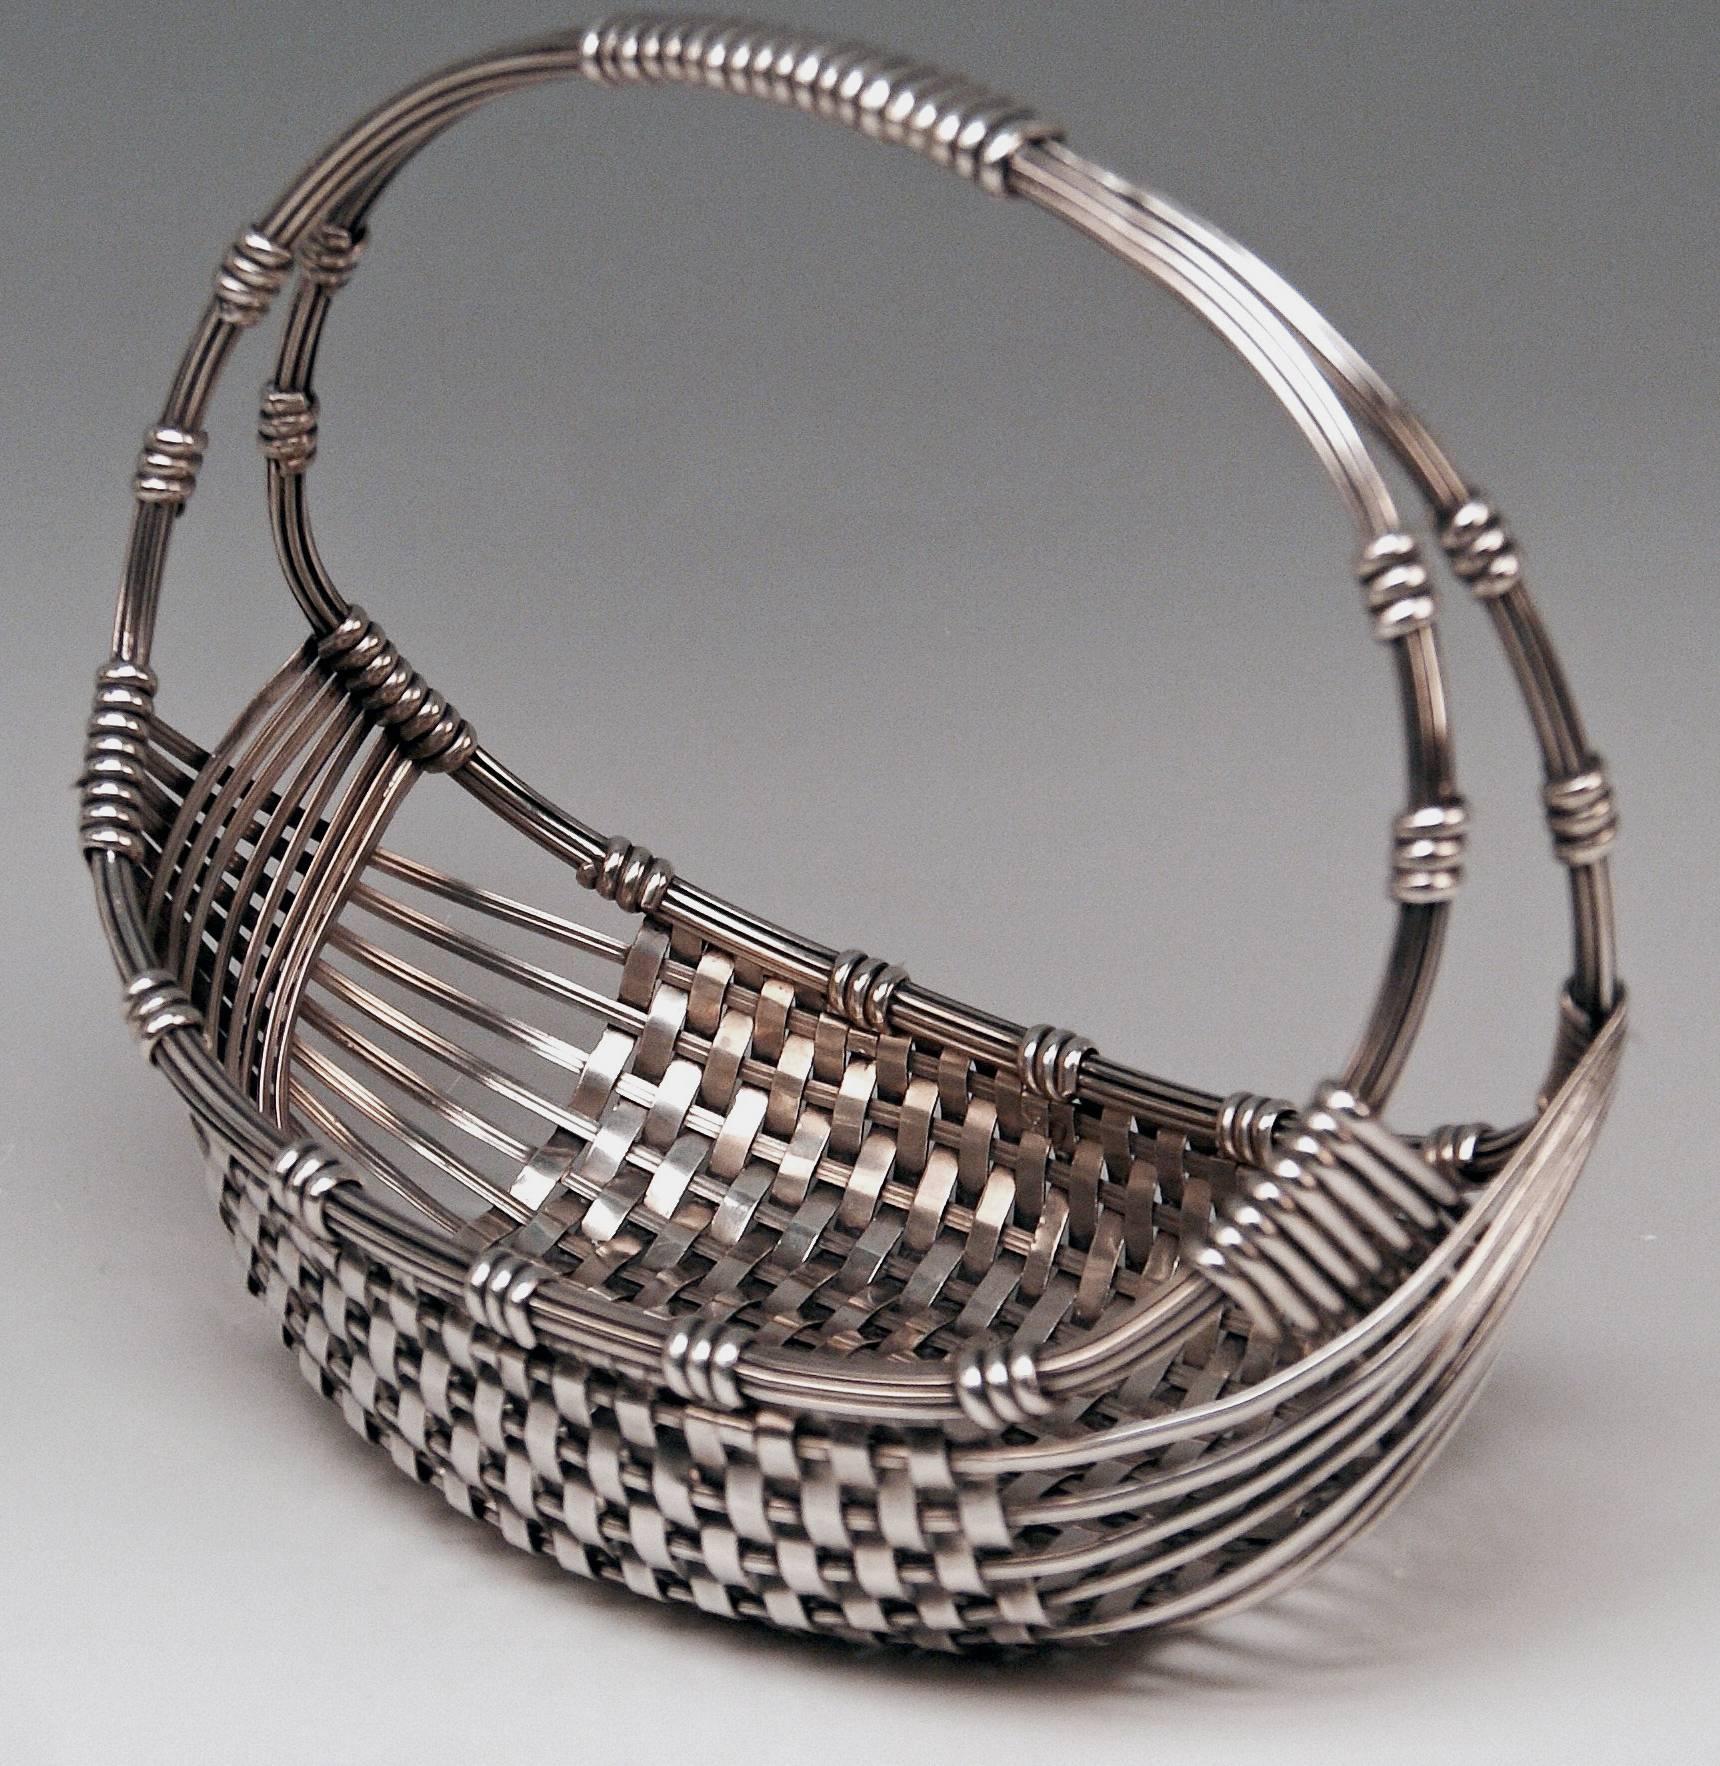 Silver Austrian stunning Art Nouveau fruit basket of most elegant appearance.

Manufactory: Famous Viennese silver manufactory JOSEF CARL KLINKOSCH (hallmarked).

Manufactured circa 1900

Made of silver800
1. branded by Austrian Imperial